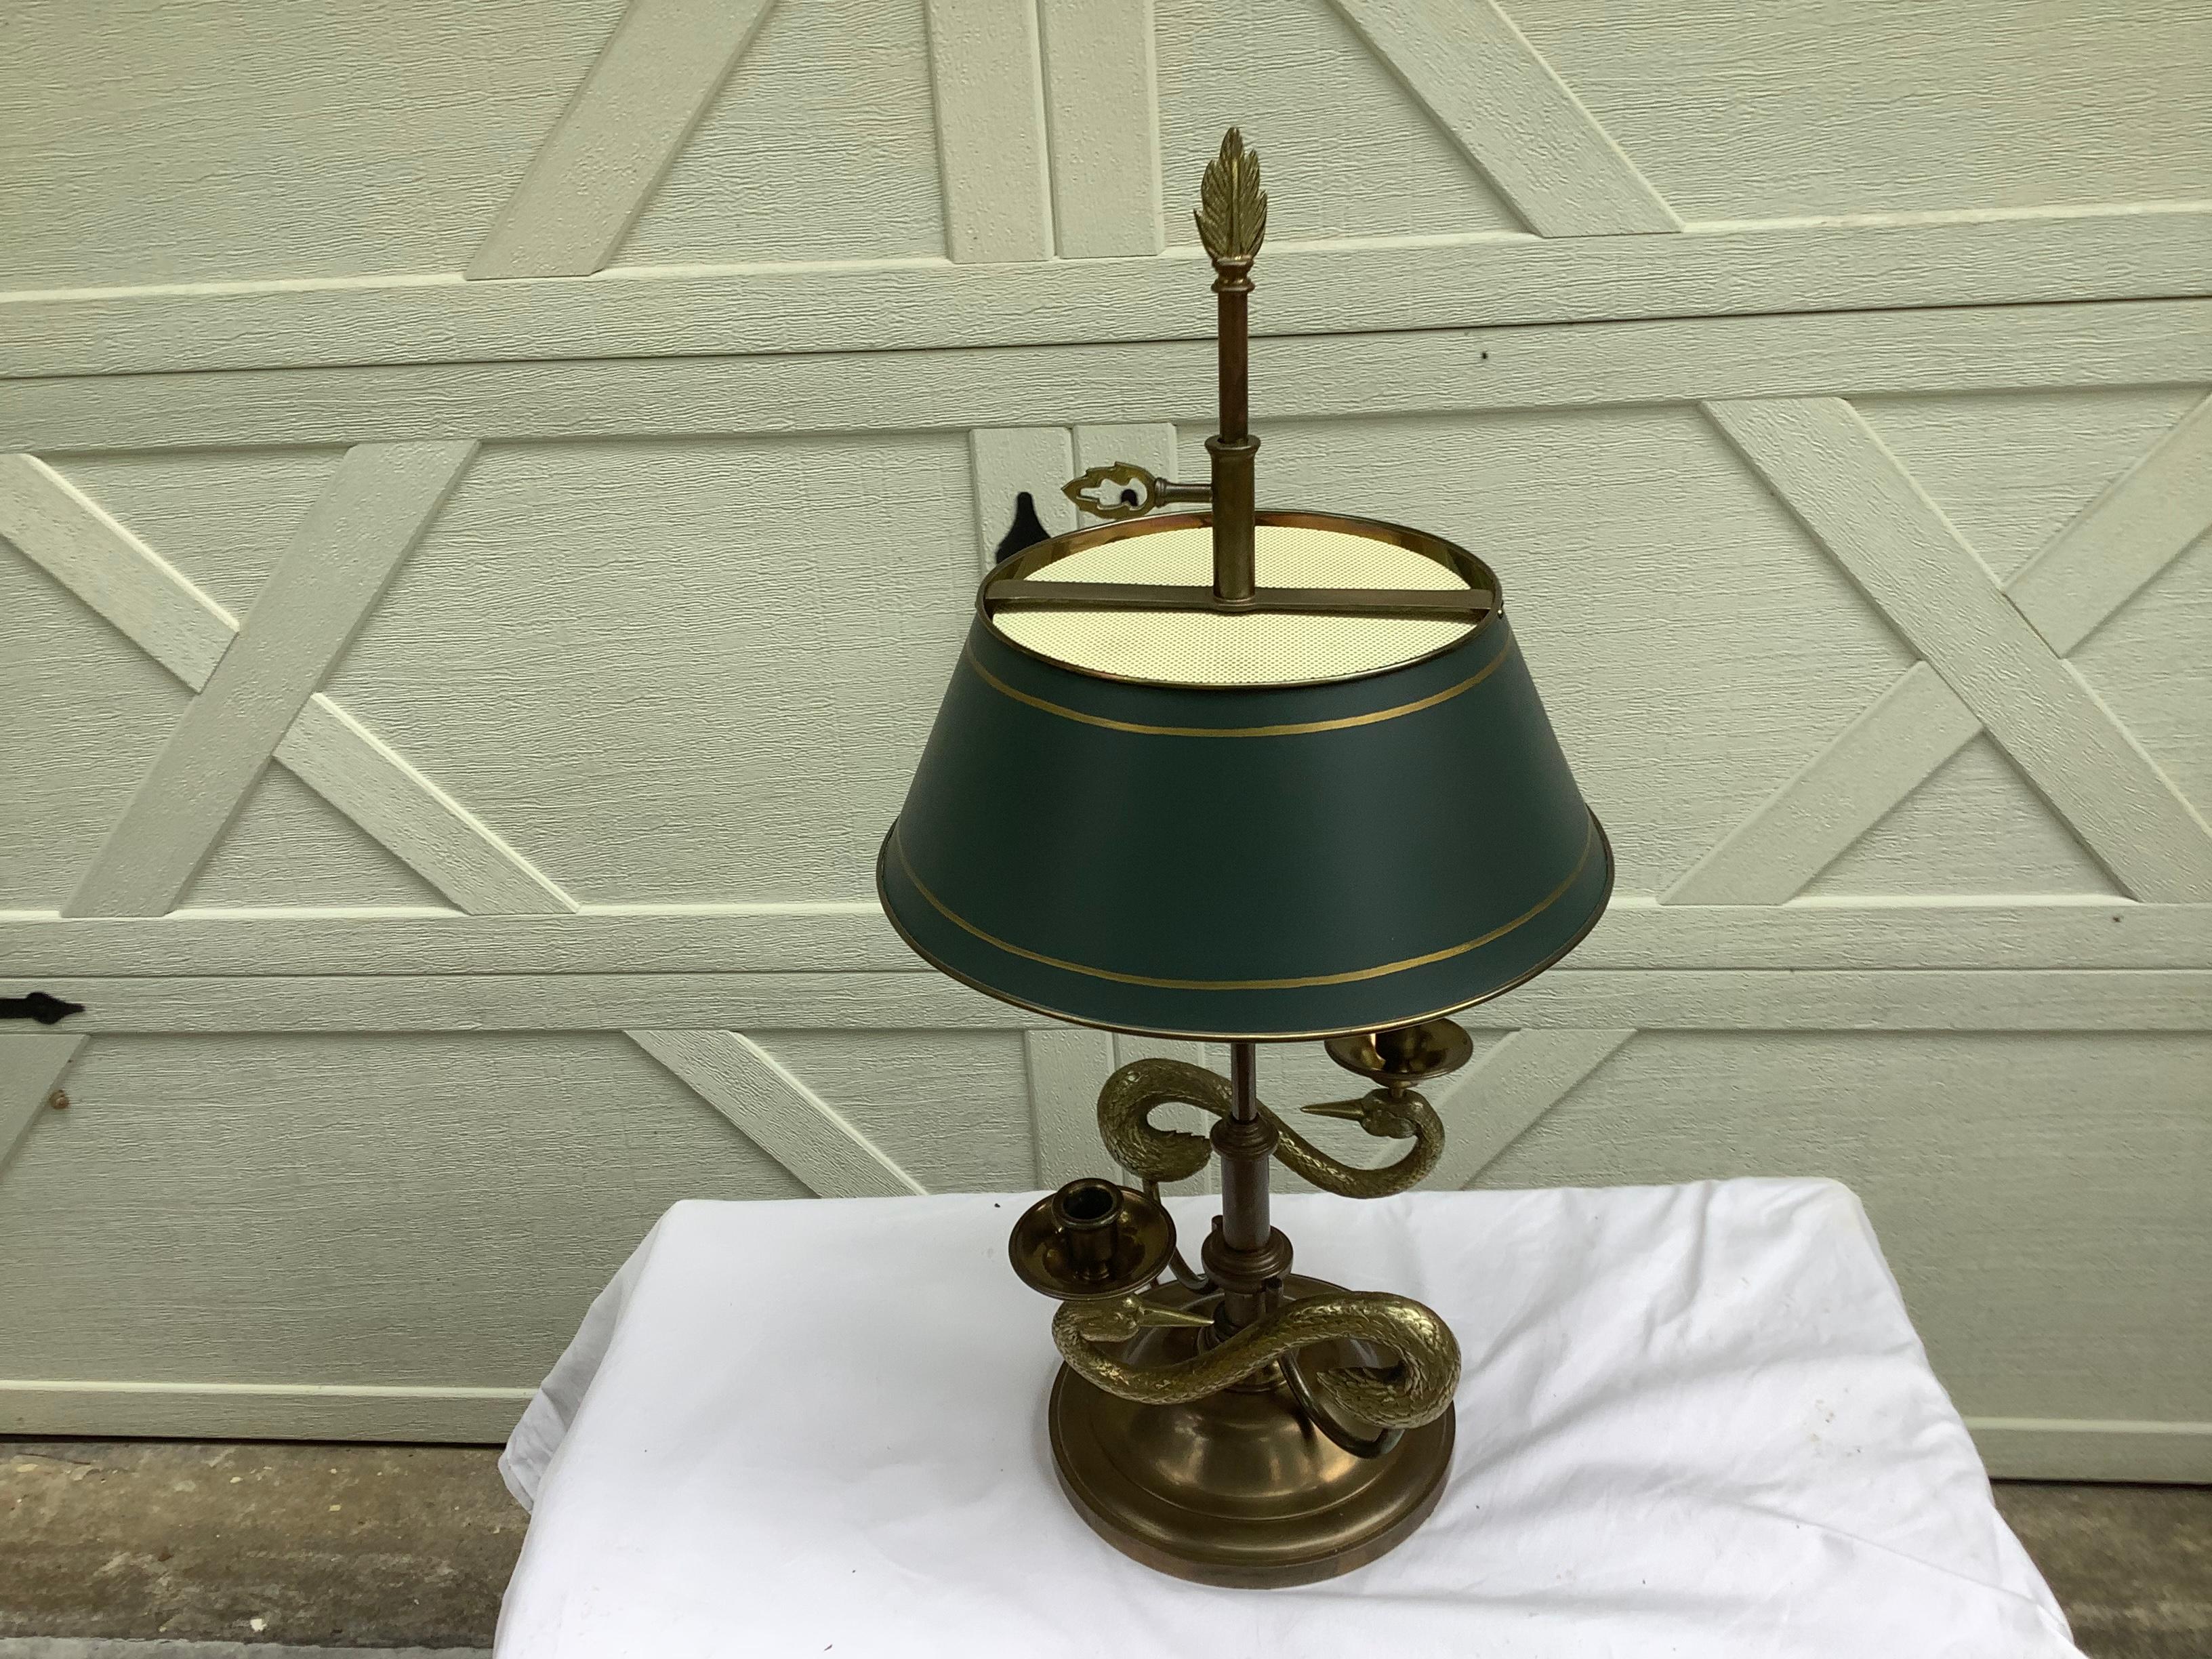 Classic bouillotte style lamp by Chapman, dated 1982. Original patina to the brass, with a green tole shade. The shade does not raise and lower, as an authentic bouilotte lamp. Intertwining swans create the base of the lamp. The measurements are as